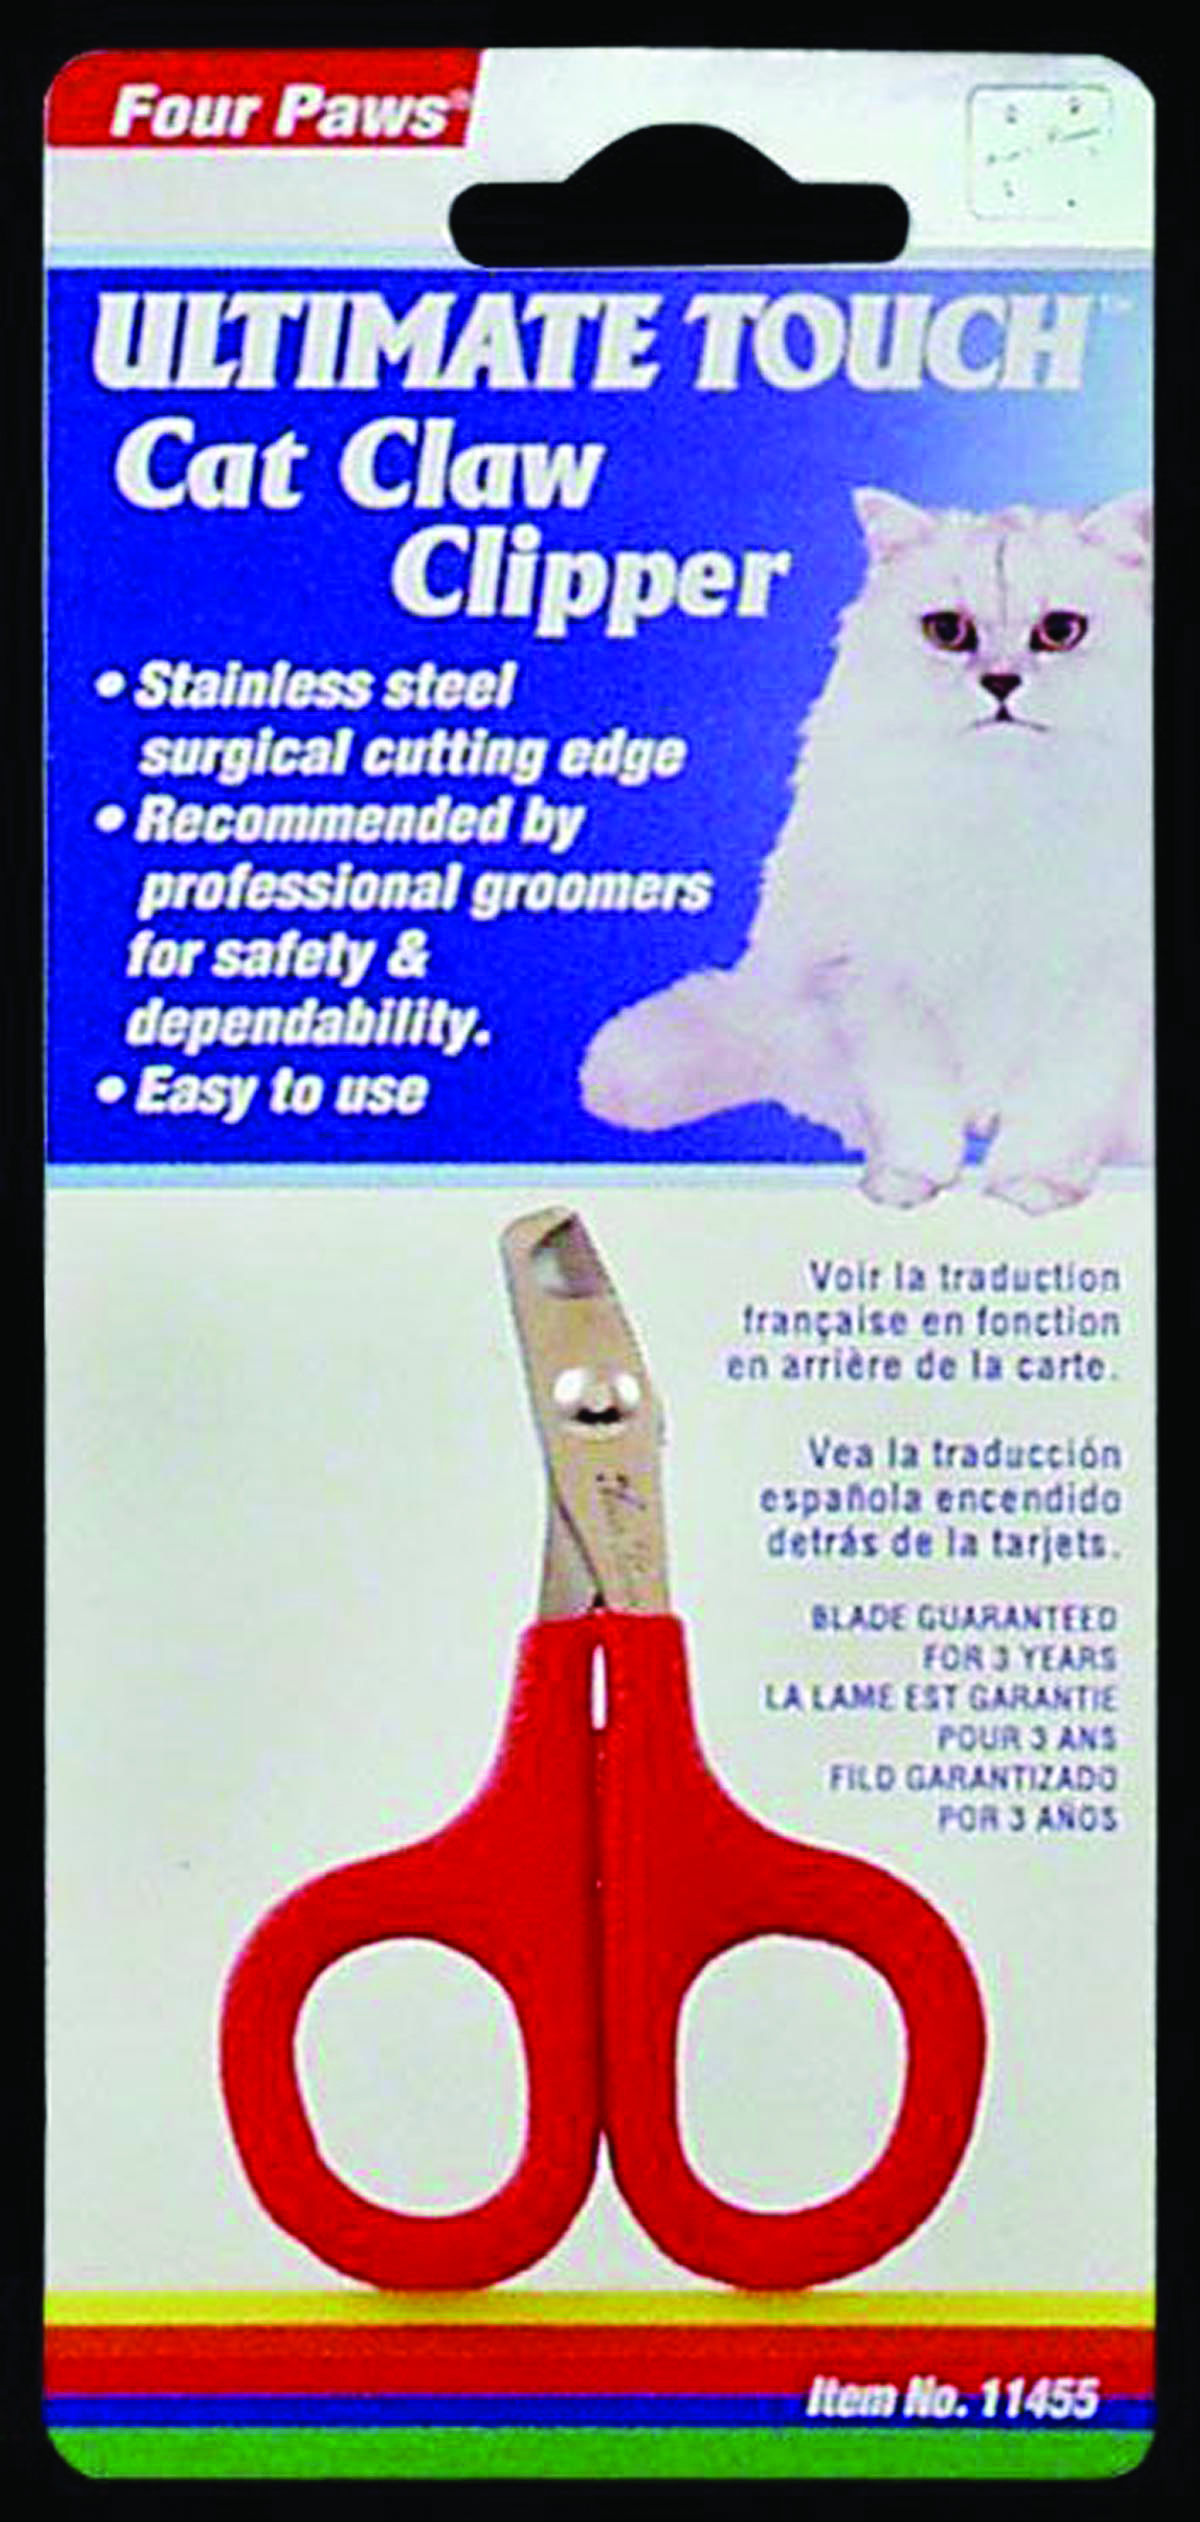 Four Paws Ultimate Touch Cat Claw Clipper